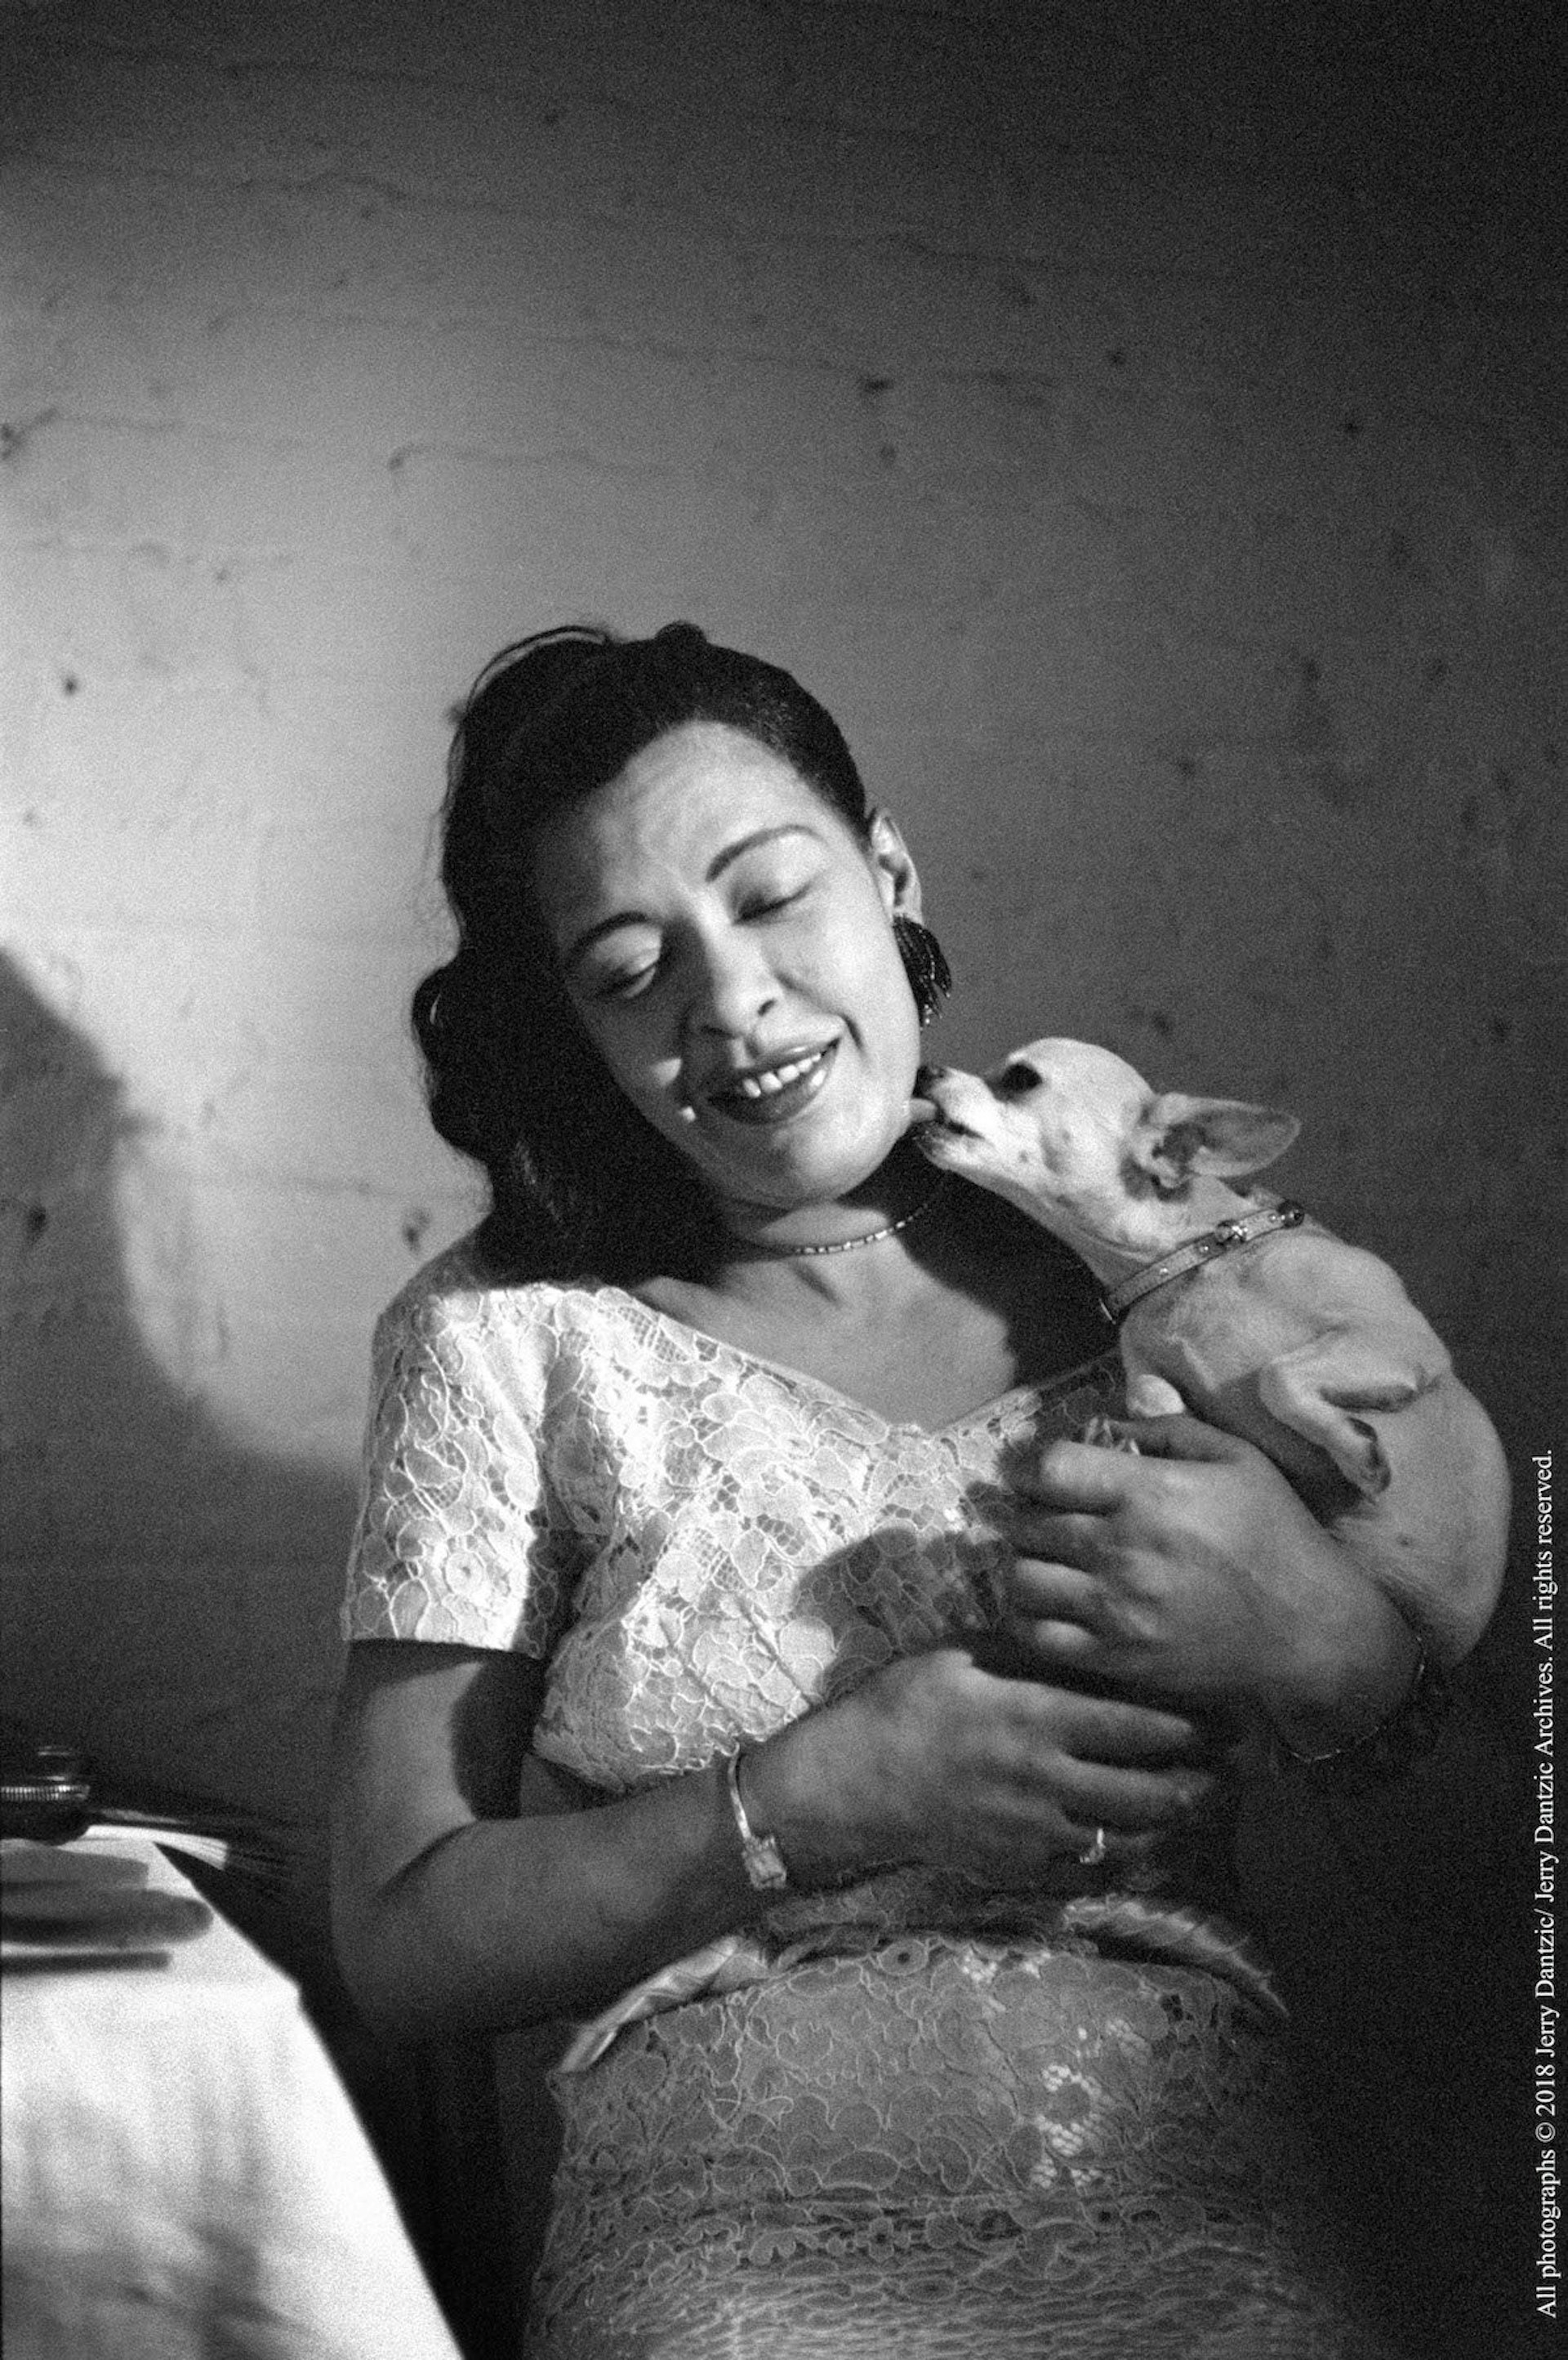 Rare and intimate photos of Billie Holiday in the ‘50s